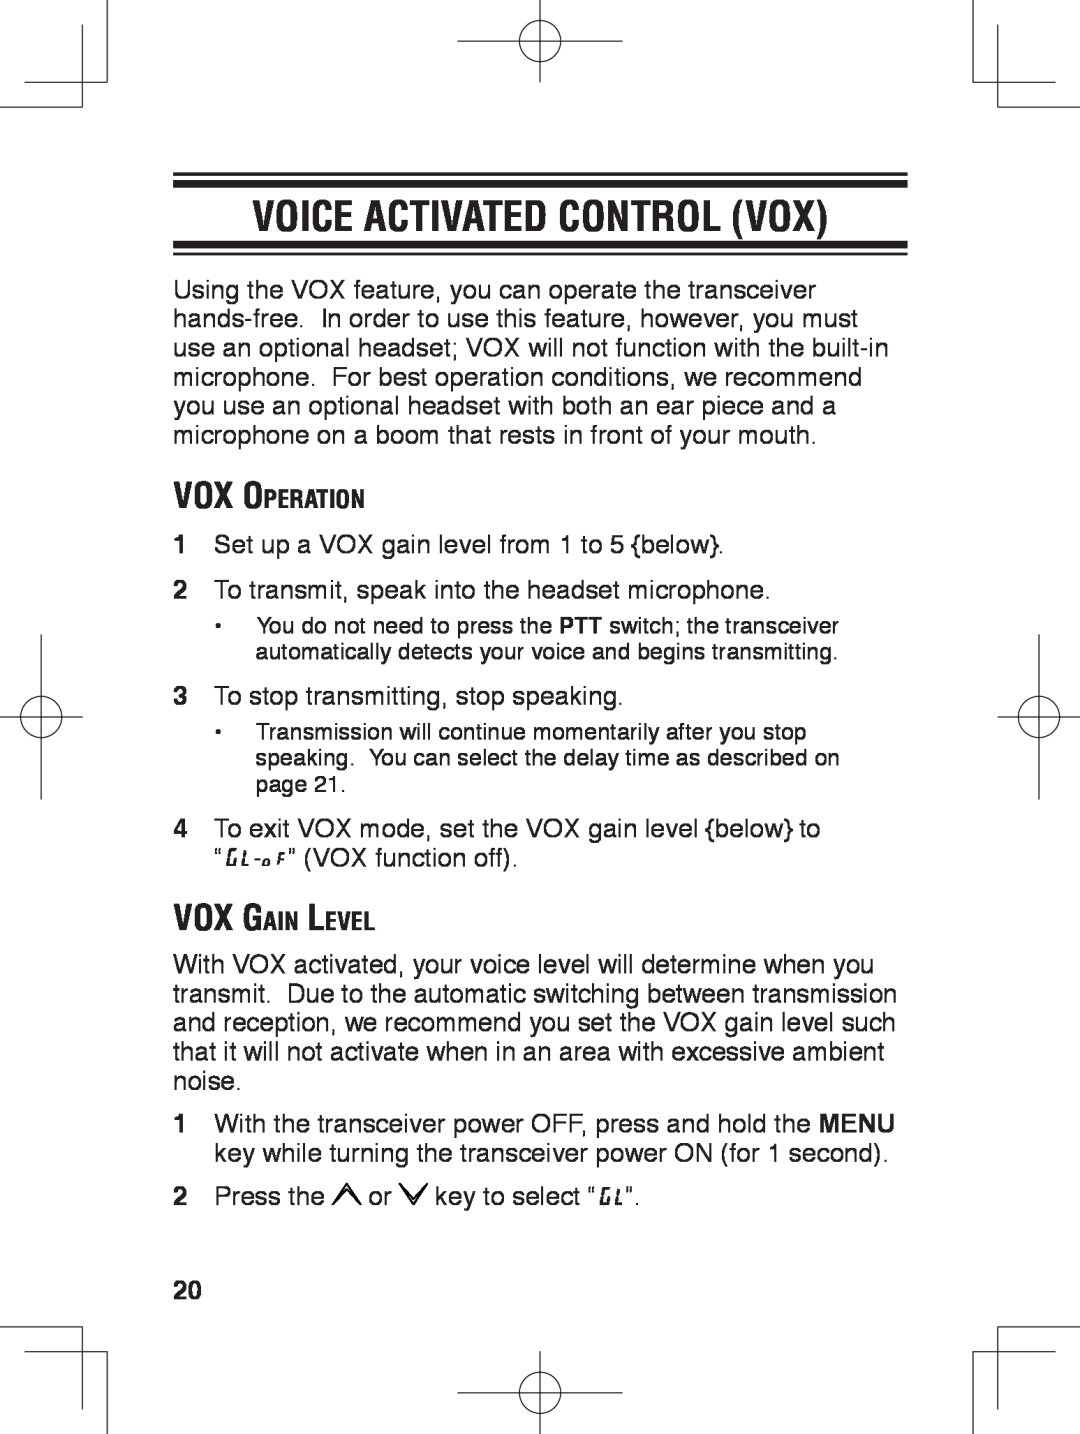 Kenwood TK-3230 instruction manual Voice Activated Control VOX 